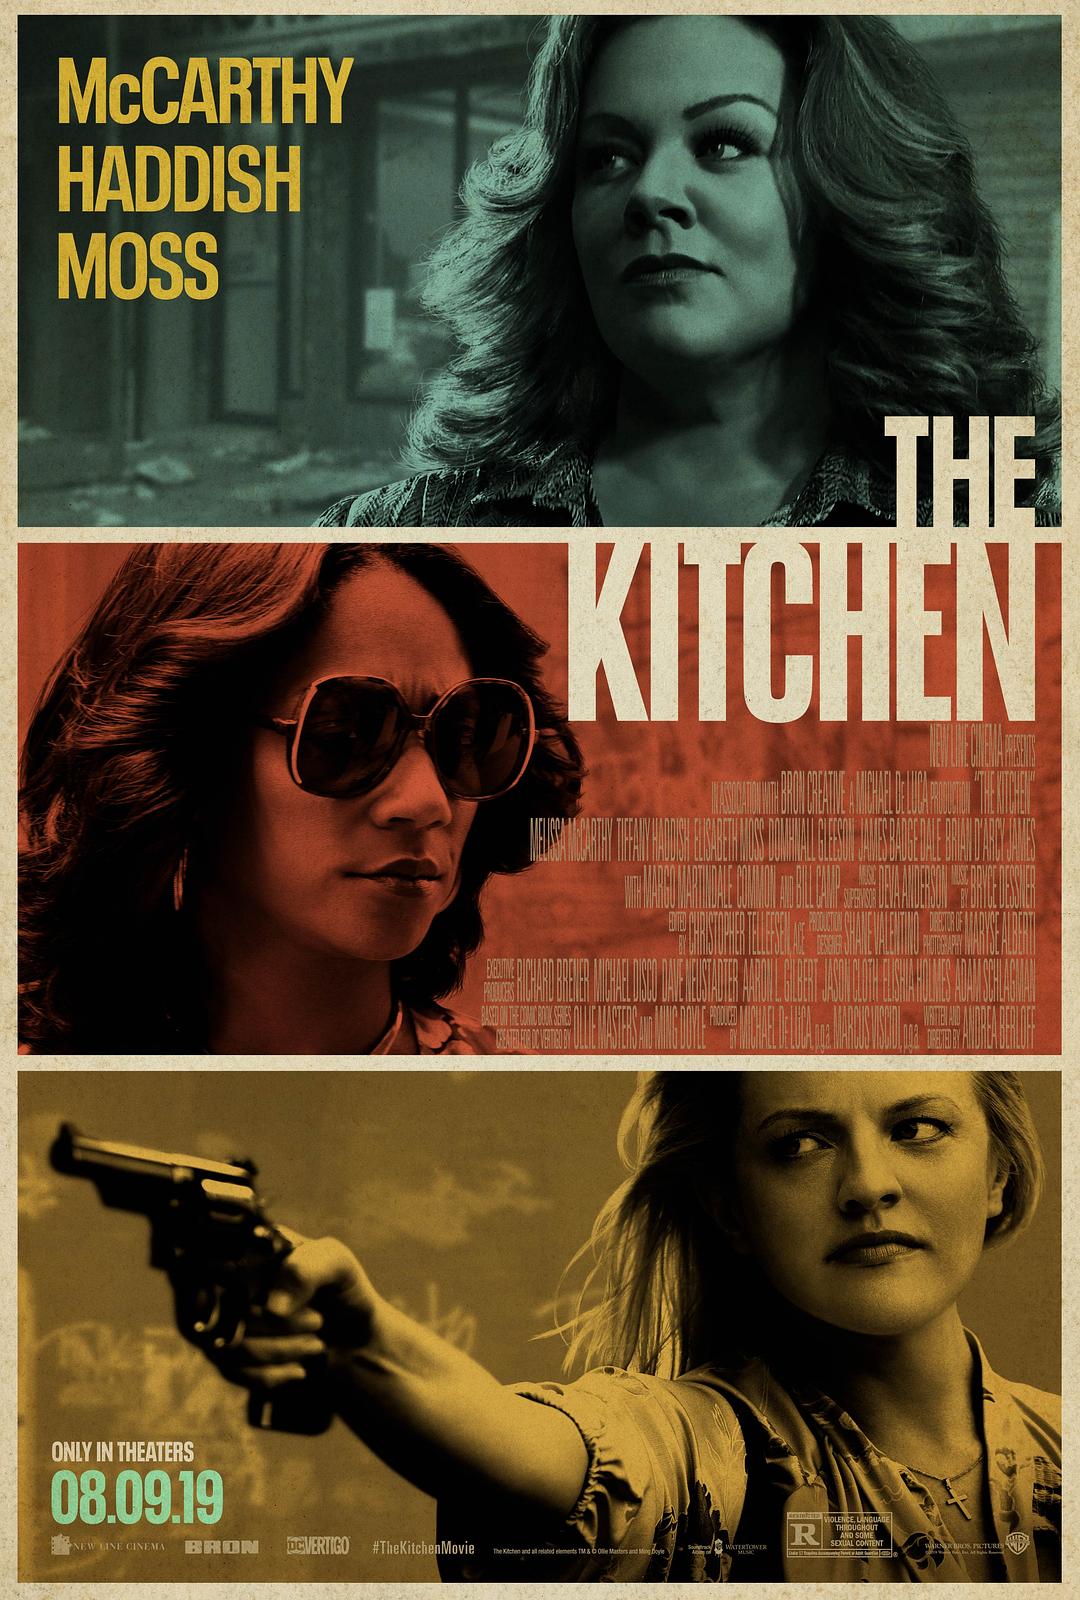  The.Kitchen.2019.1080p.BluRay.AVC.DTS-HD.MA.5.1-FGT 35.78GB-1.png